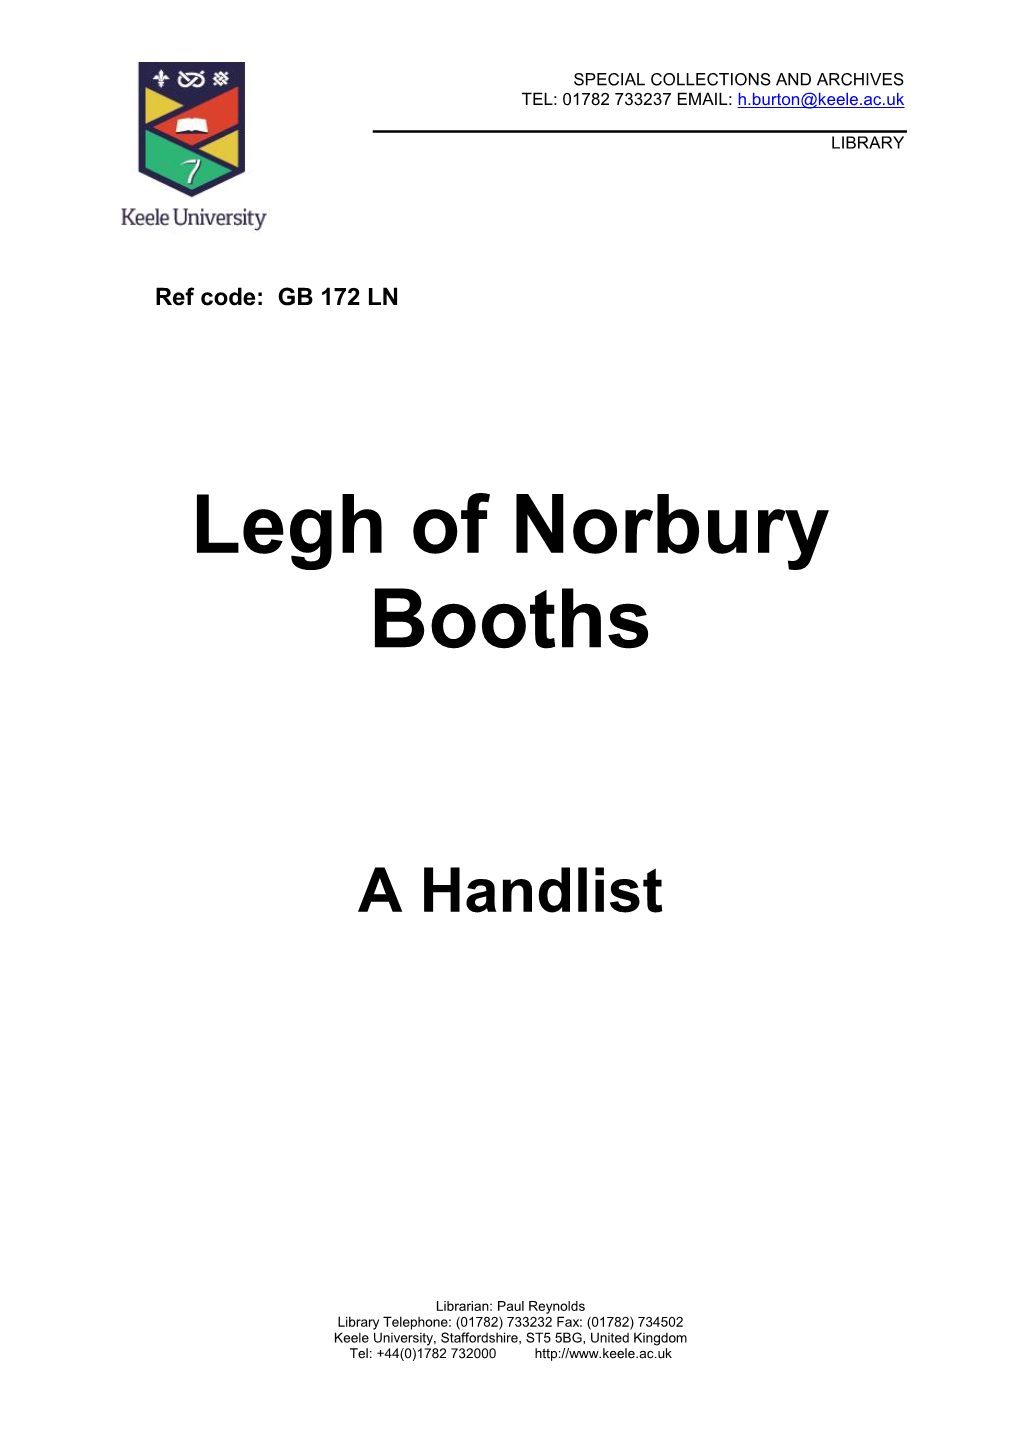 Legh of Norbury Booths